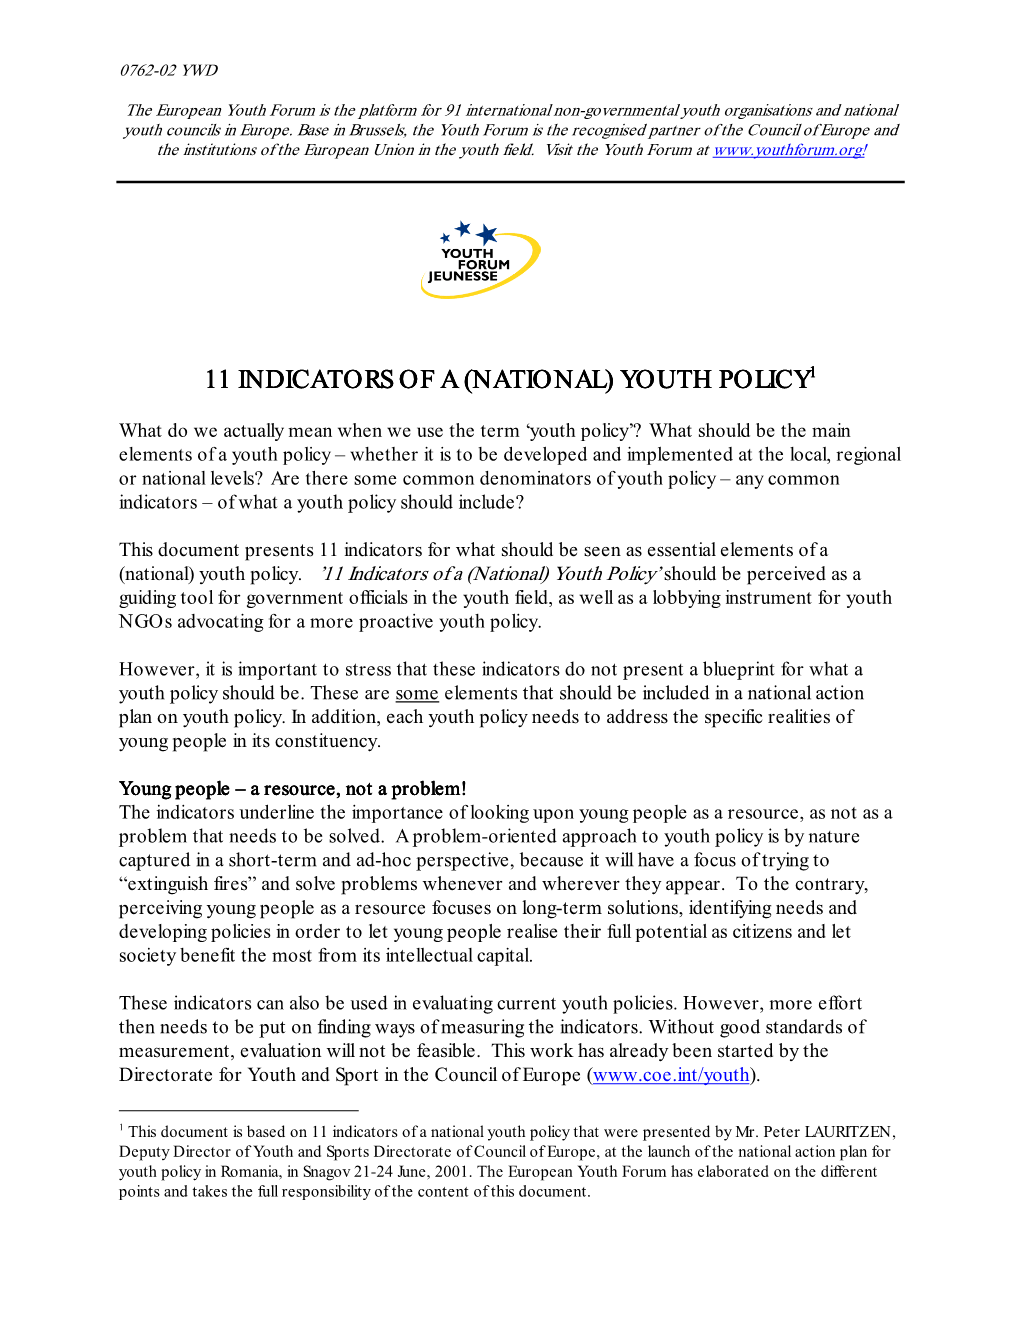 11 Indicators of a (National) Youth Policy1